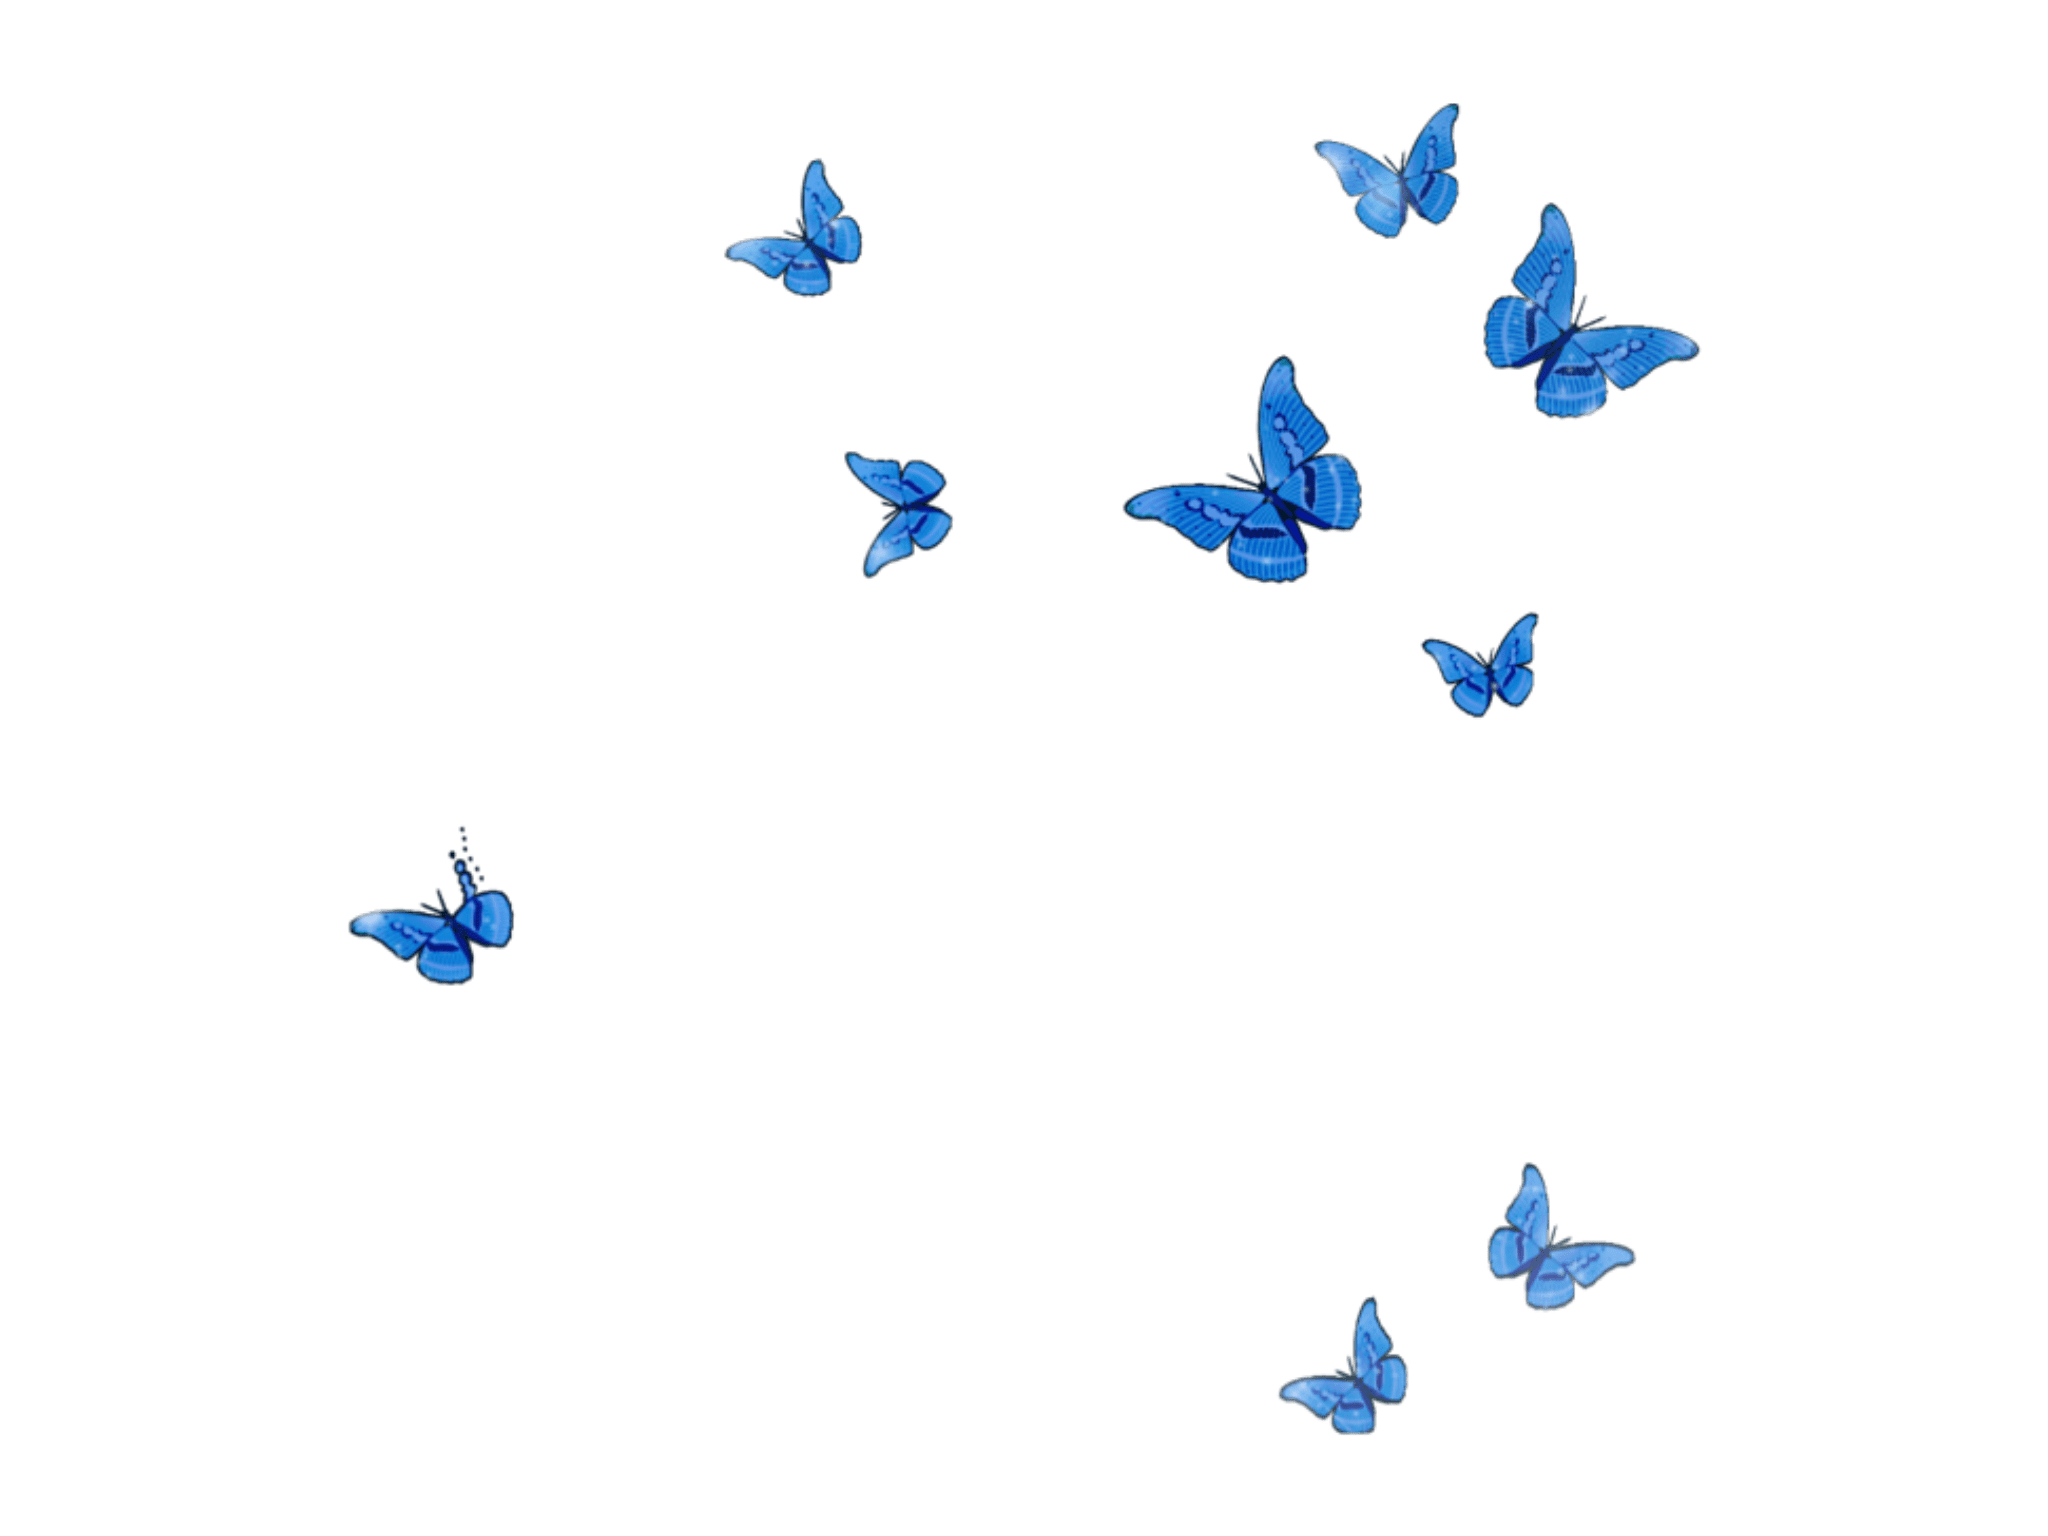 Blue Butterfly Aesthetic Wallpapers Top Free Blue Butterfly Aesthetic Backgrounds Wallpaperaccess